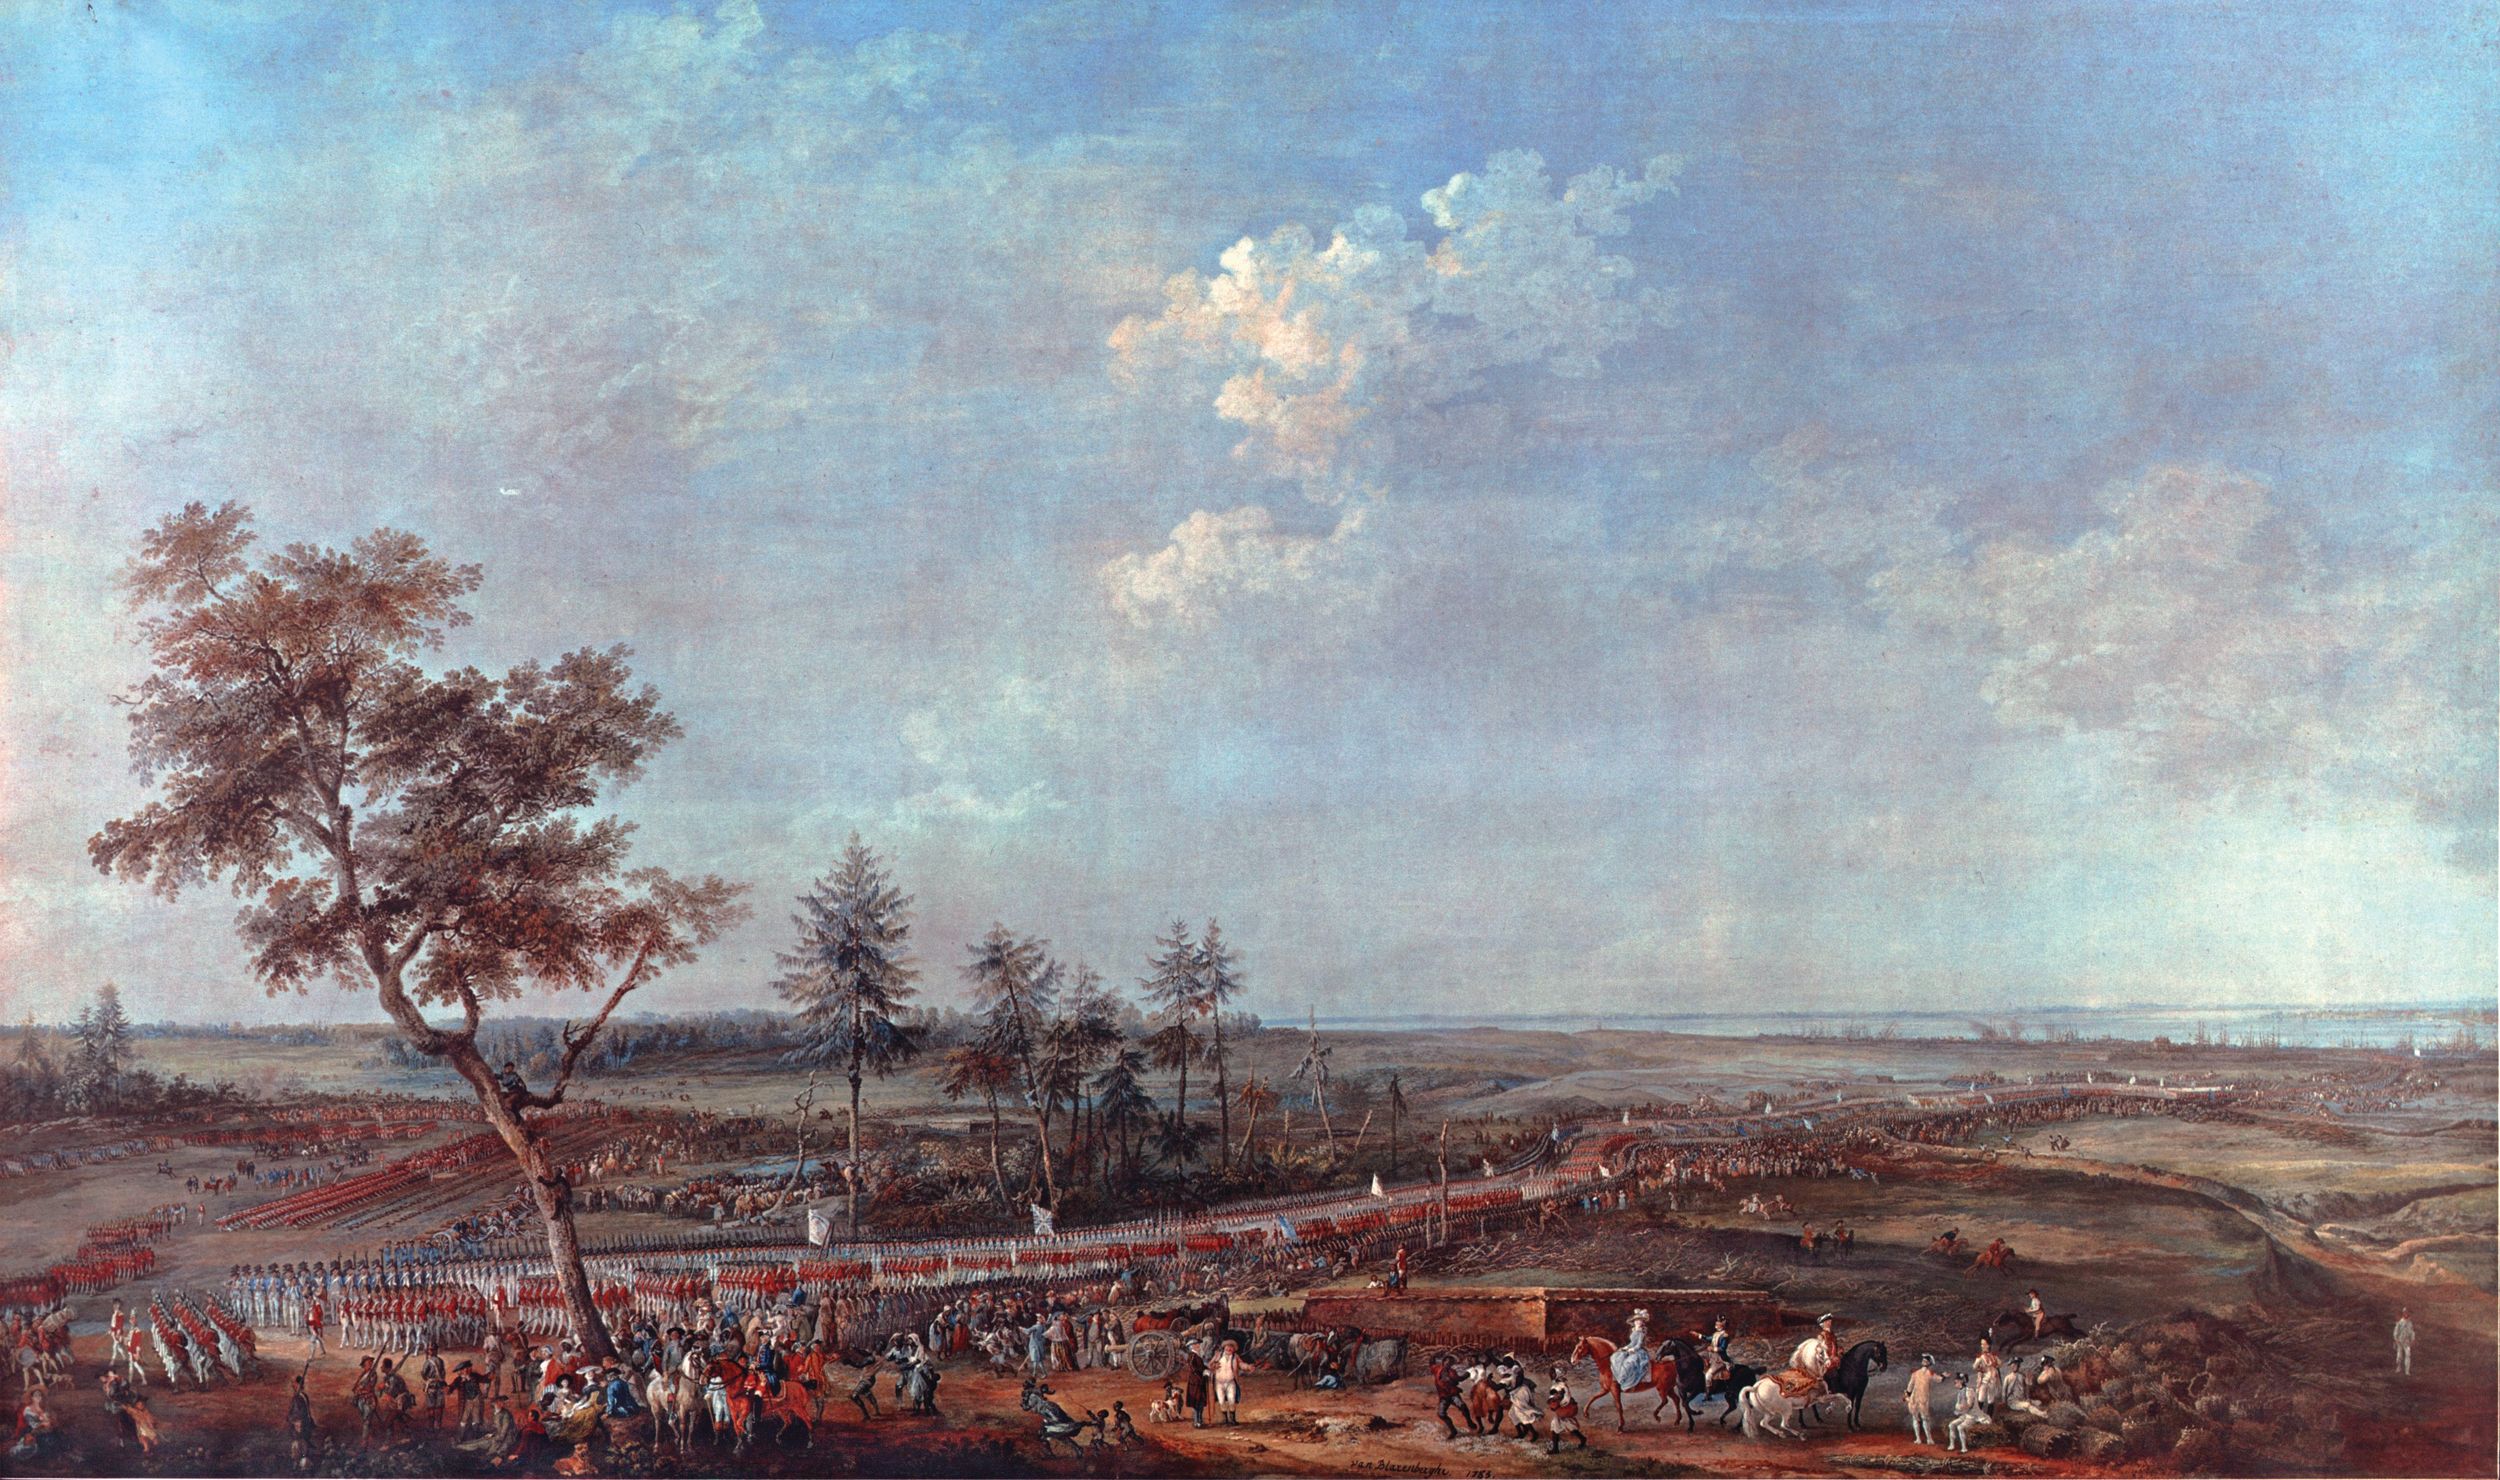 Painted four years after the siege and based on eyewitness accounts, a French artist depicts the defeated British Army marching out of Yorktown. American soldiers line the near side of the road, while French troops stand on the far side. Redcoats are grounding their arms in the field at the left while spectators gather in the foreground to watch. 